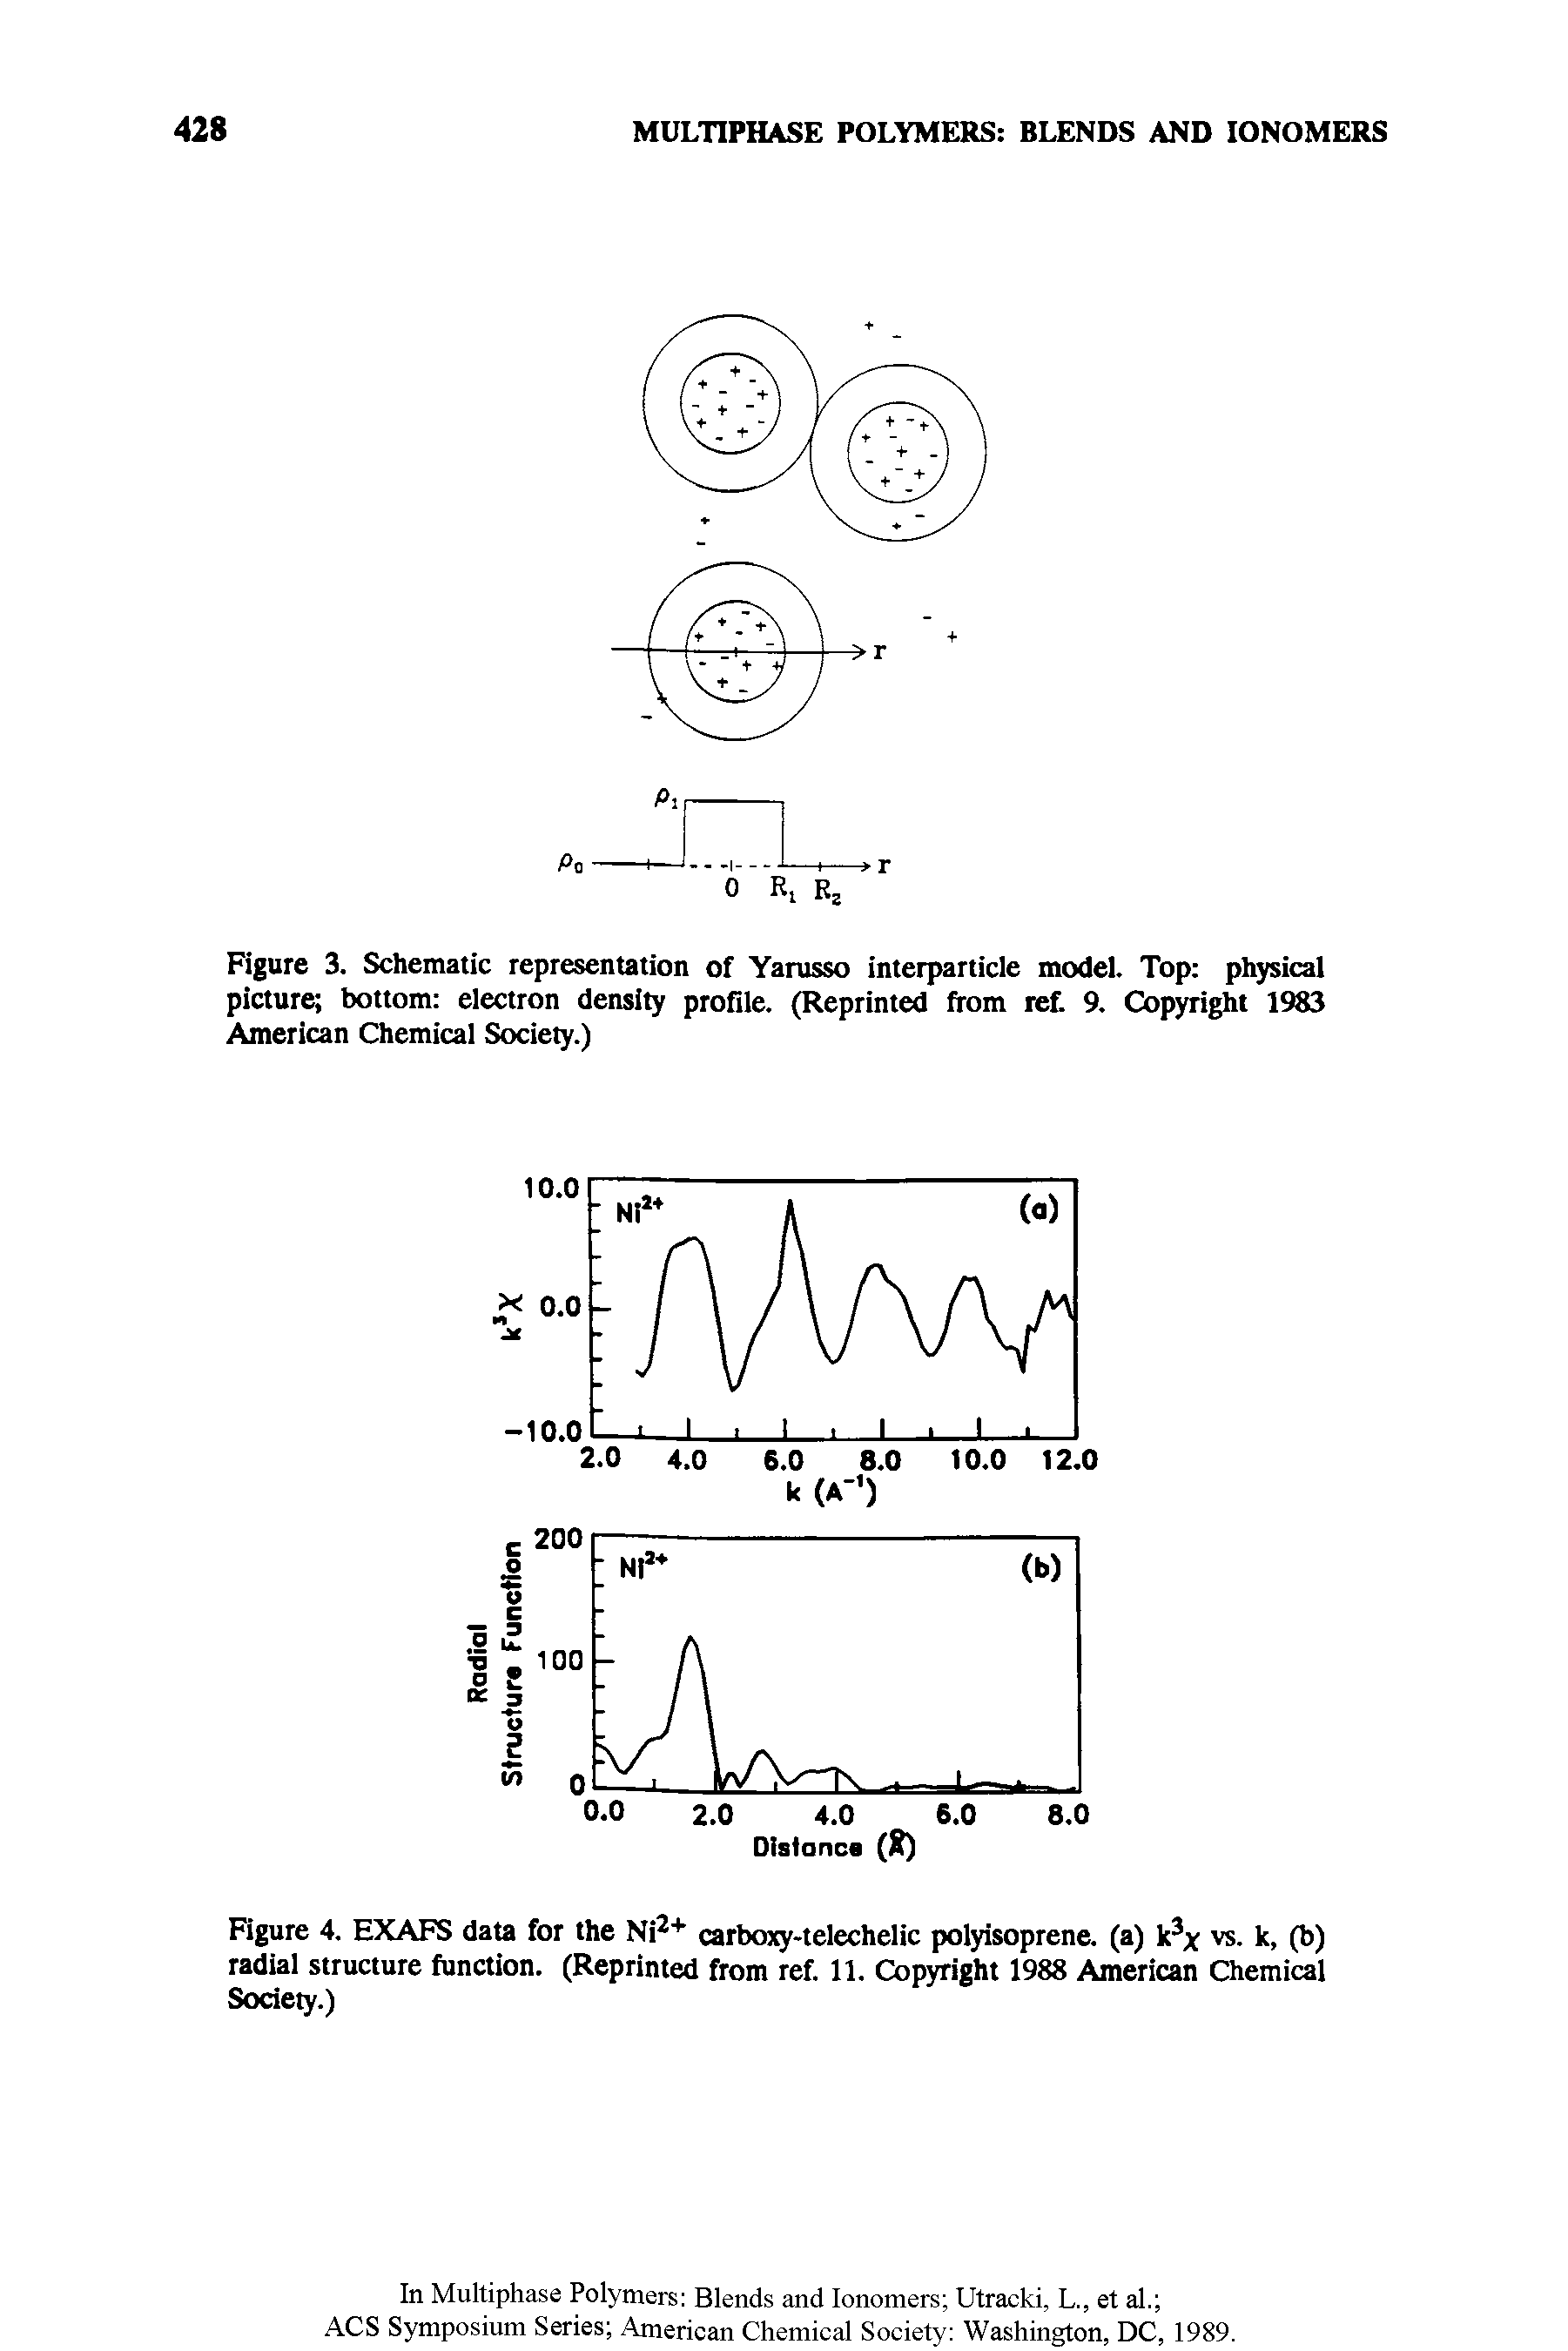 Figure 4. EXAFS data for the Np carboxy-telechelic polyisoprene, (a) k vs. k, (b) radial structure function. (Reprinted from ref. 11. Copyright 1988 American Chemical Society.)...